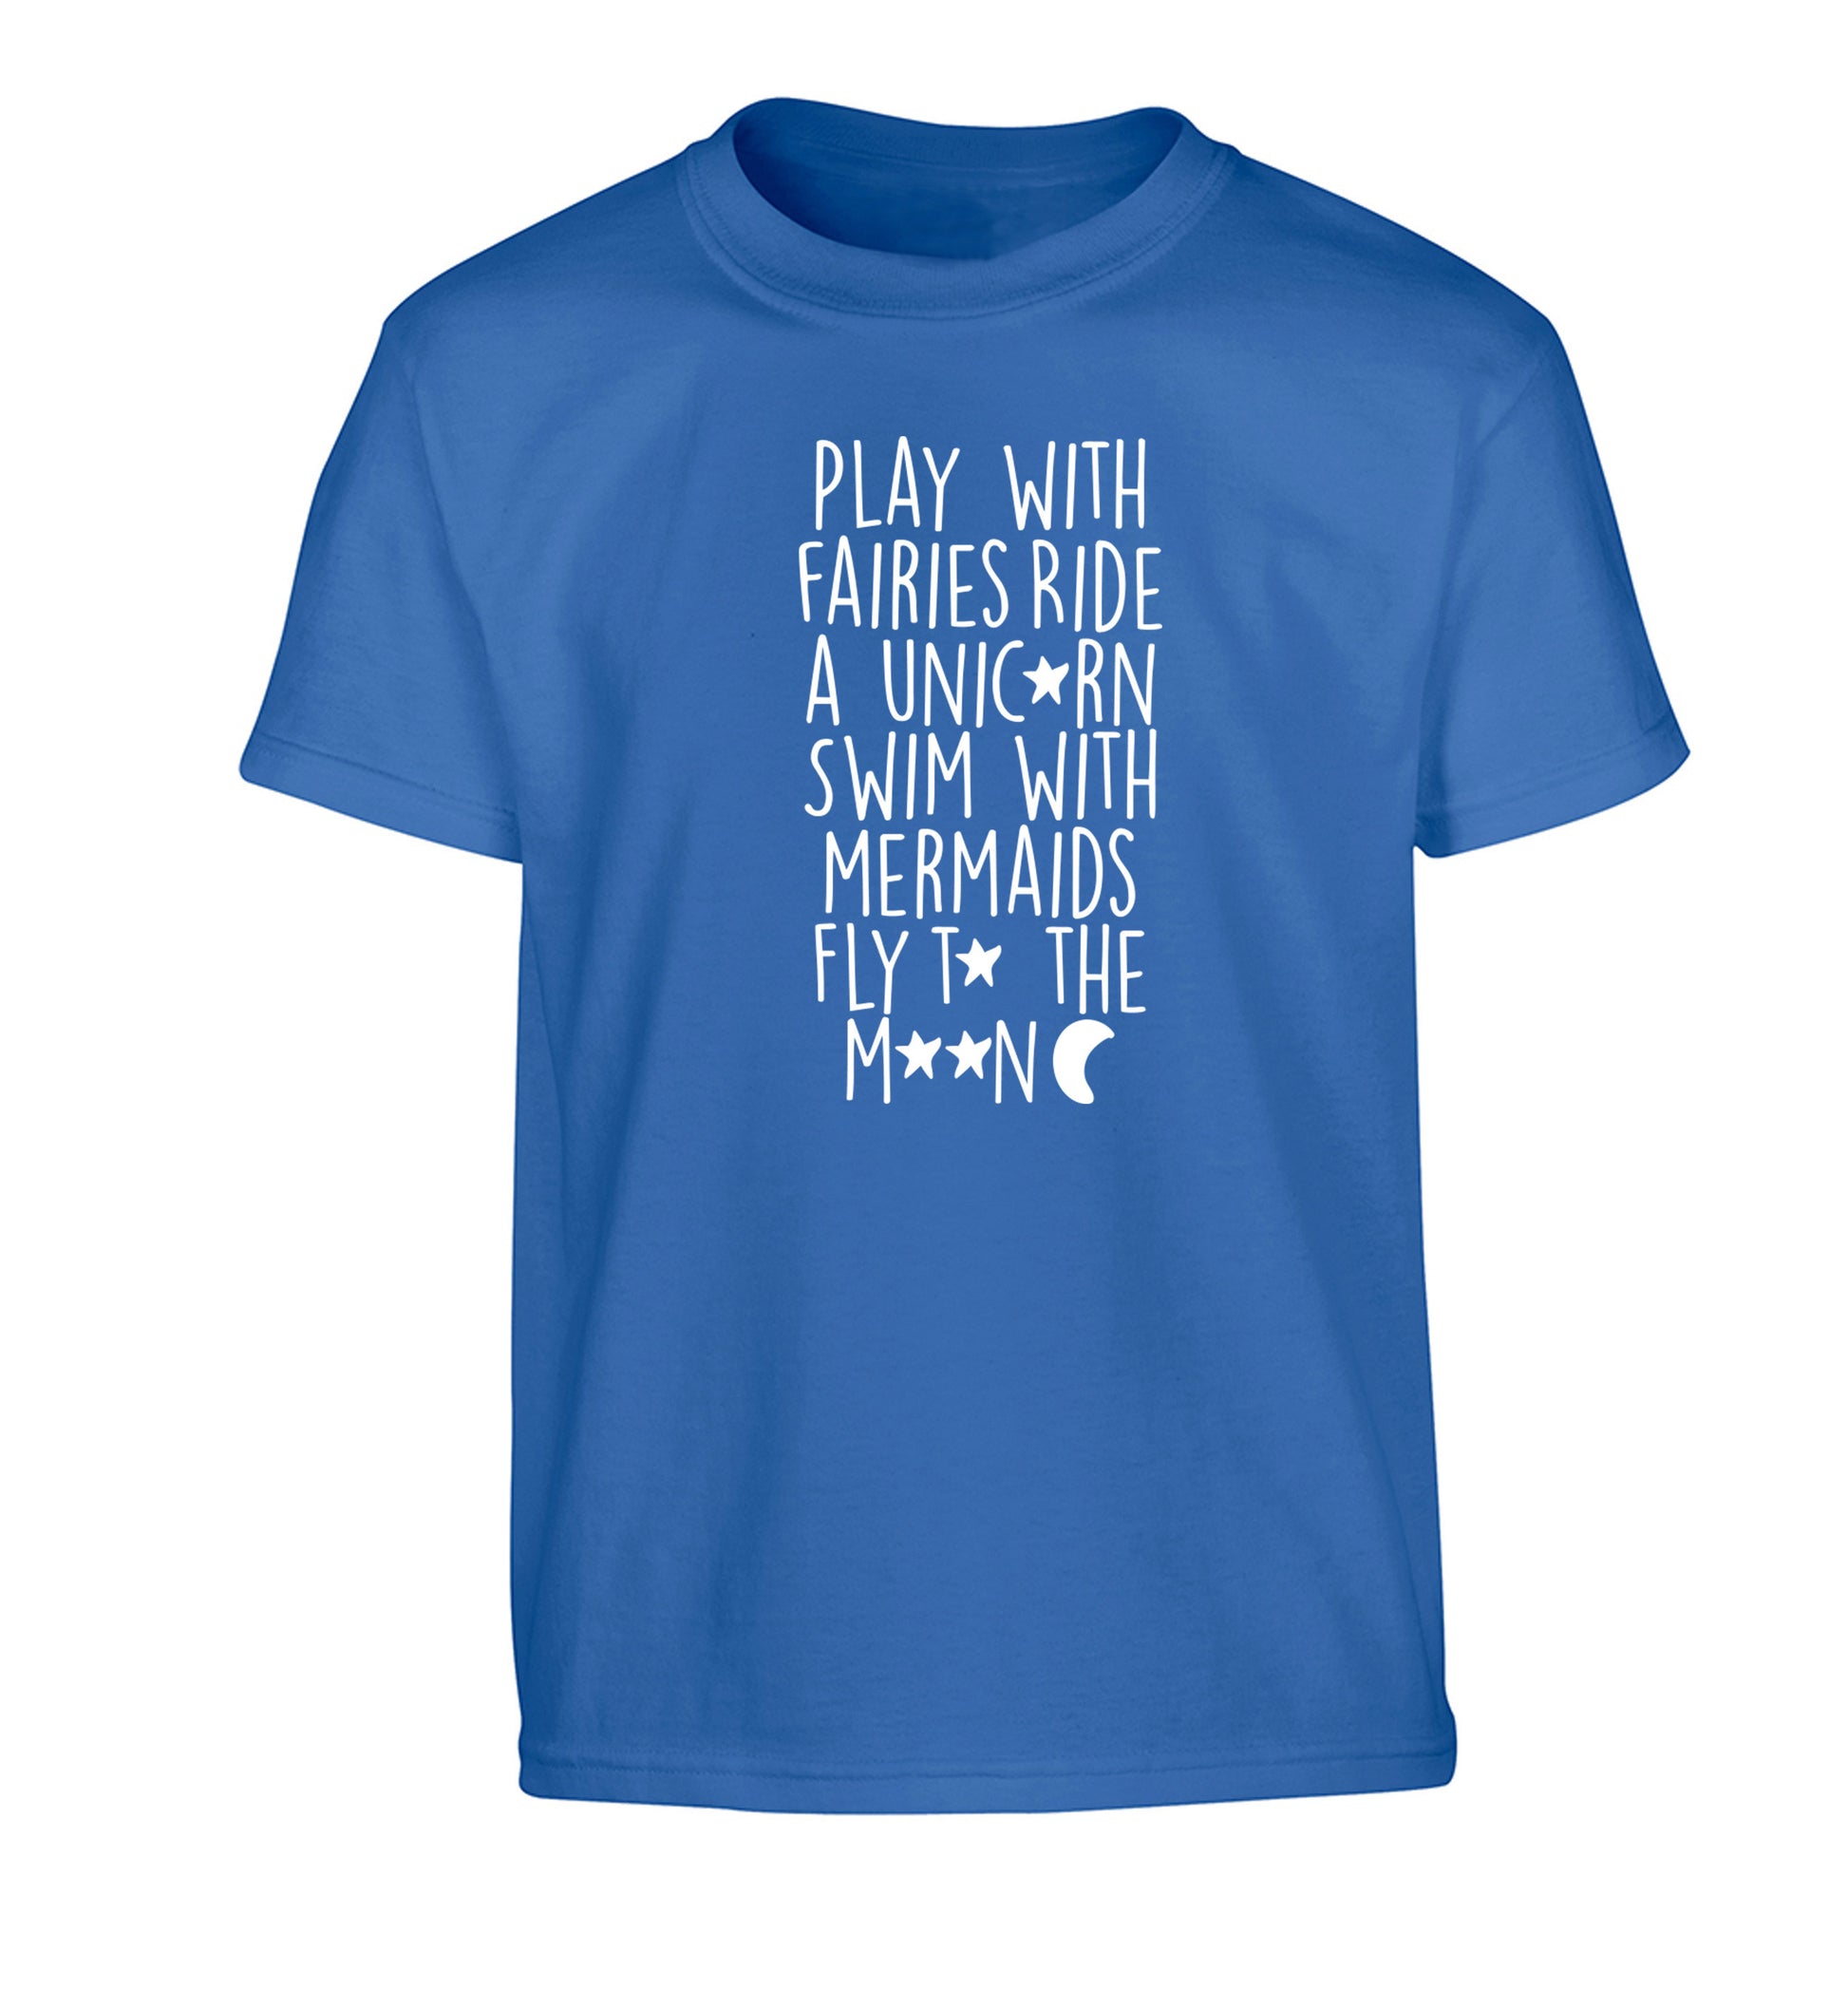 Play with fairies ride a unicorn swim with mermaids fly to the moon Children's blue Tshirt 12-14 Years